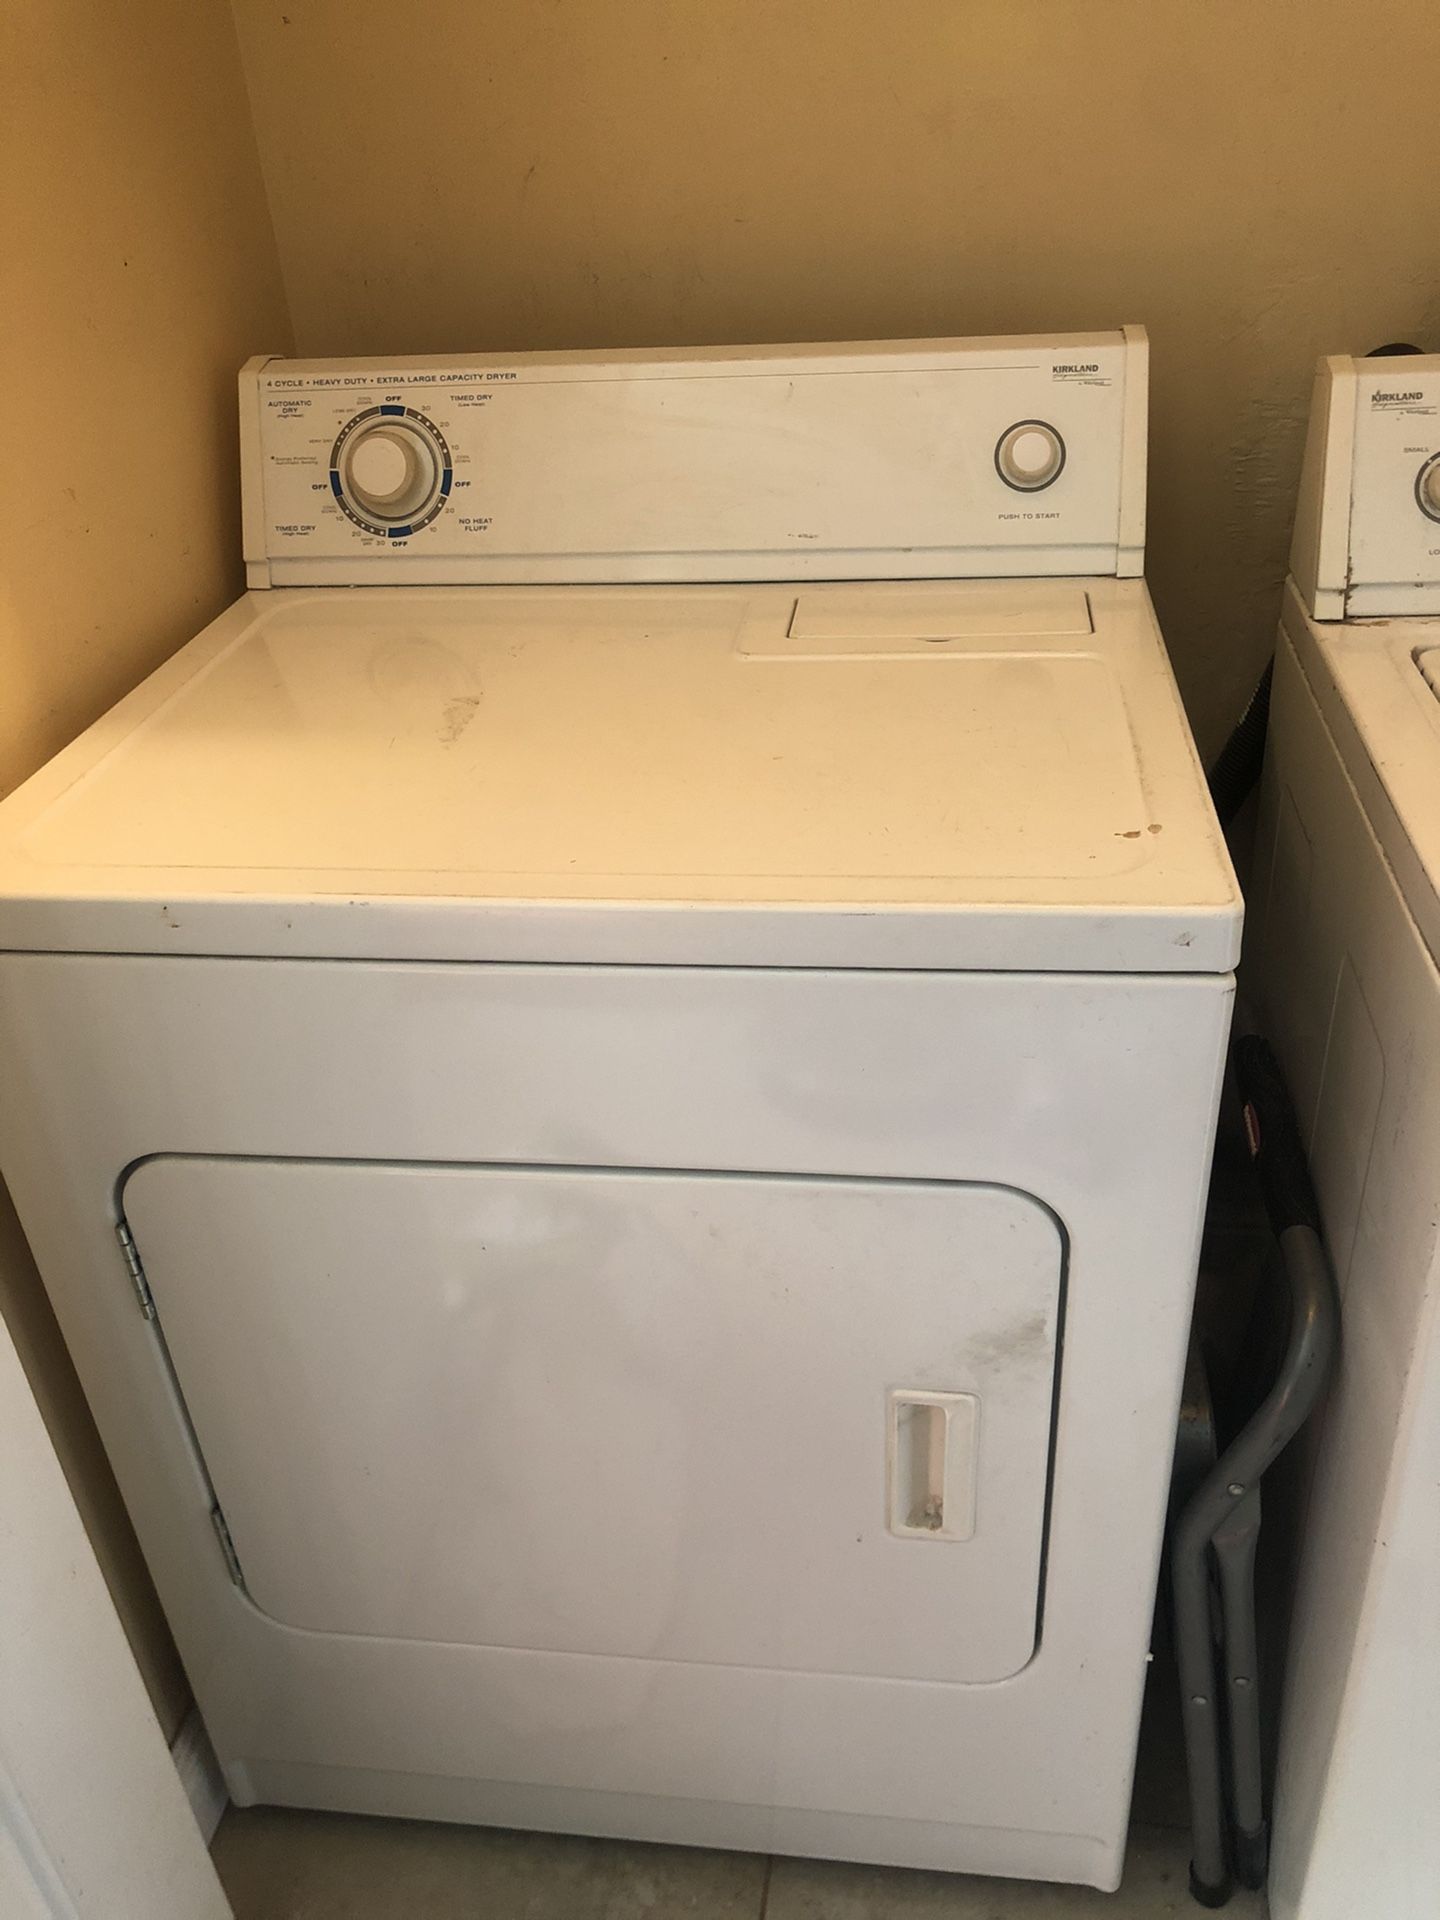 Washer & Dryer ($50 Each, $100 Total)